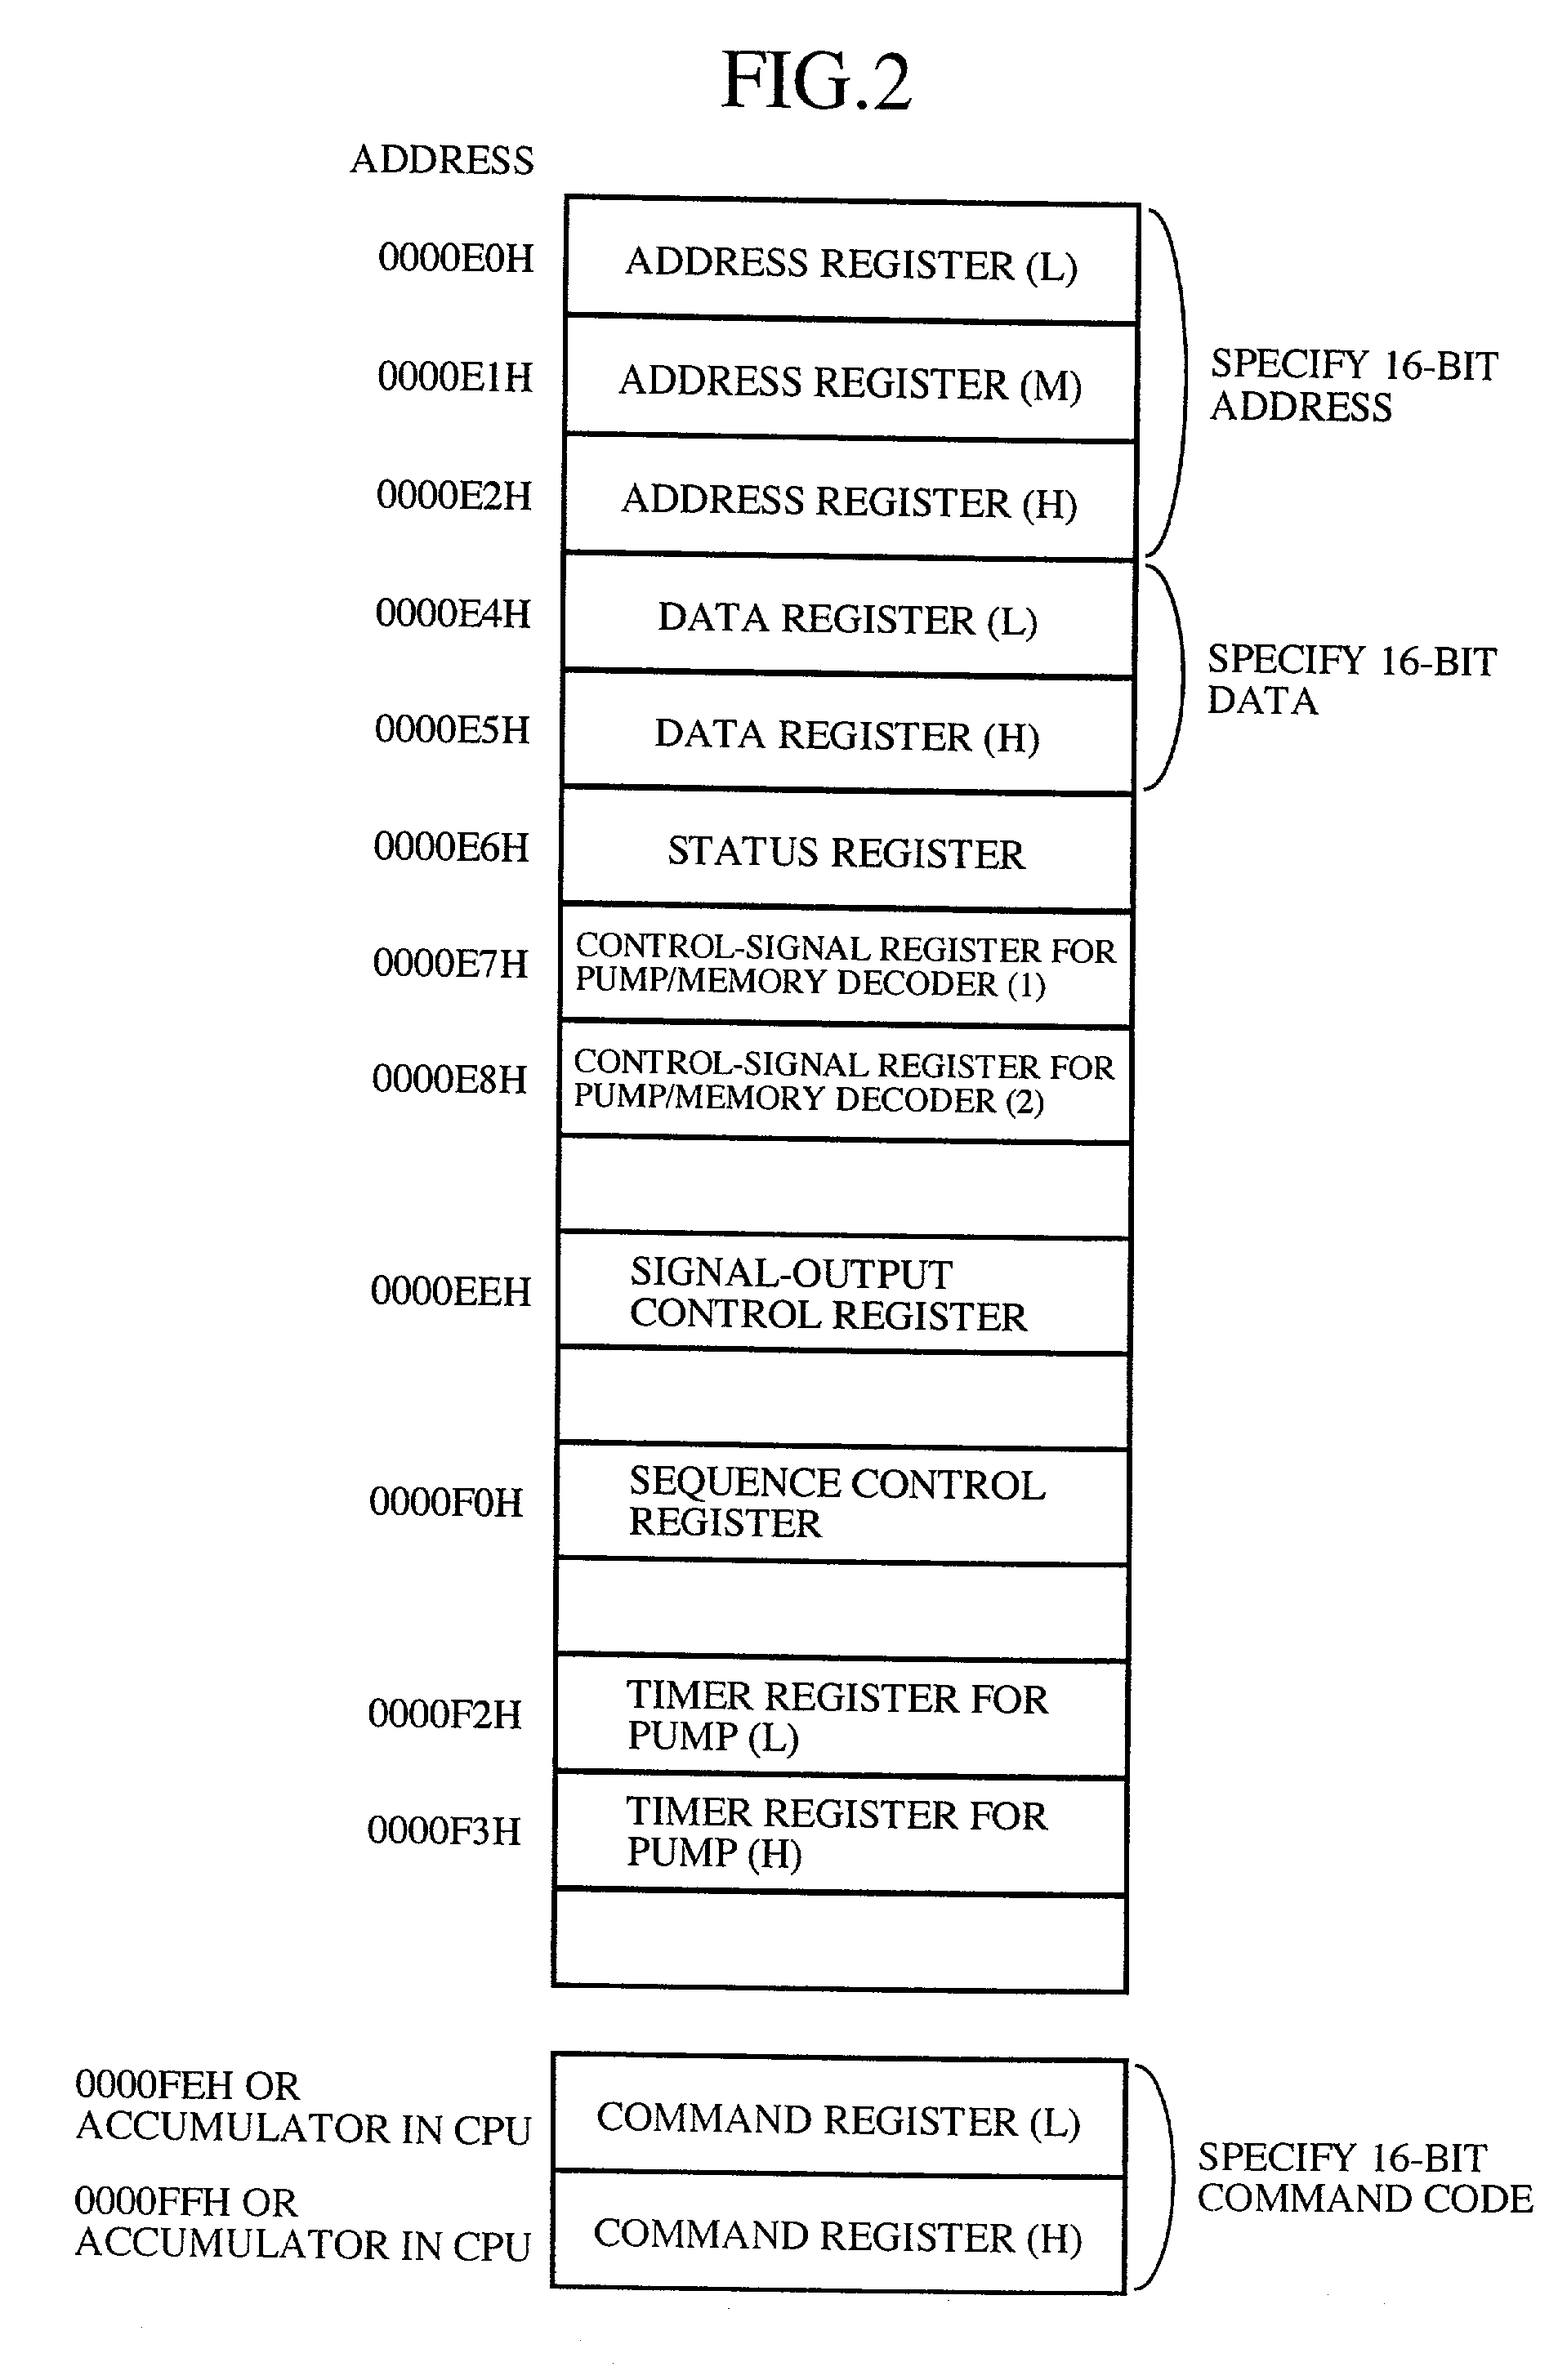 Microcomputer with built-in programmable nonvolatile memory